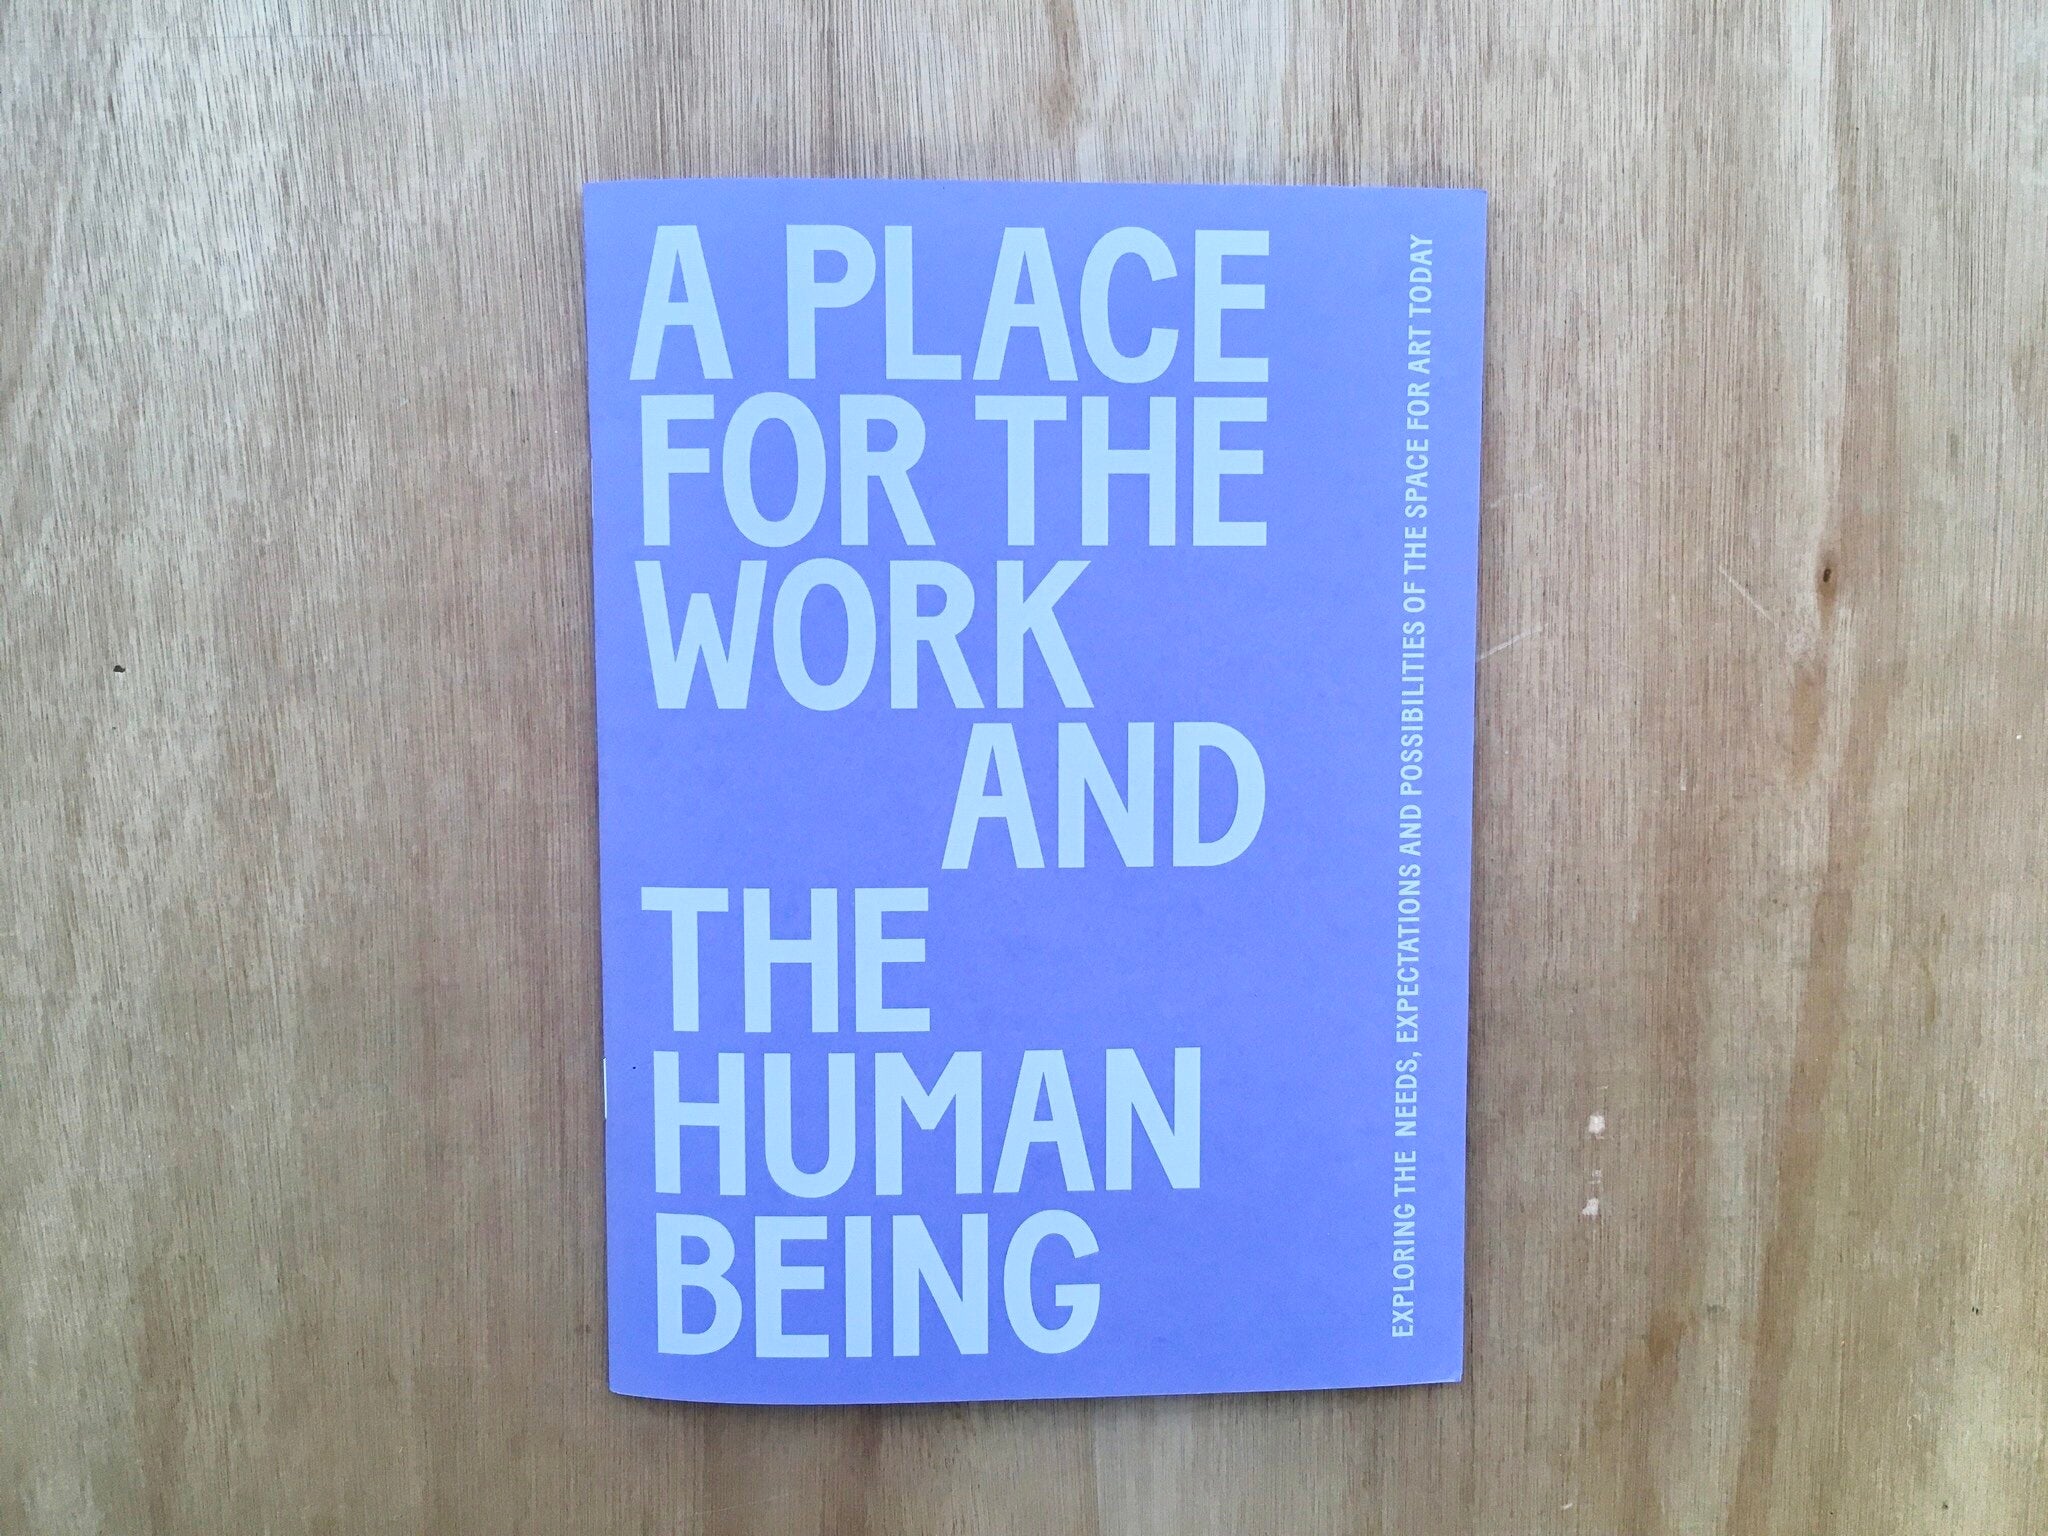 A PLACE FOR THE WORK AND THE HUMAN BEING